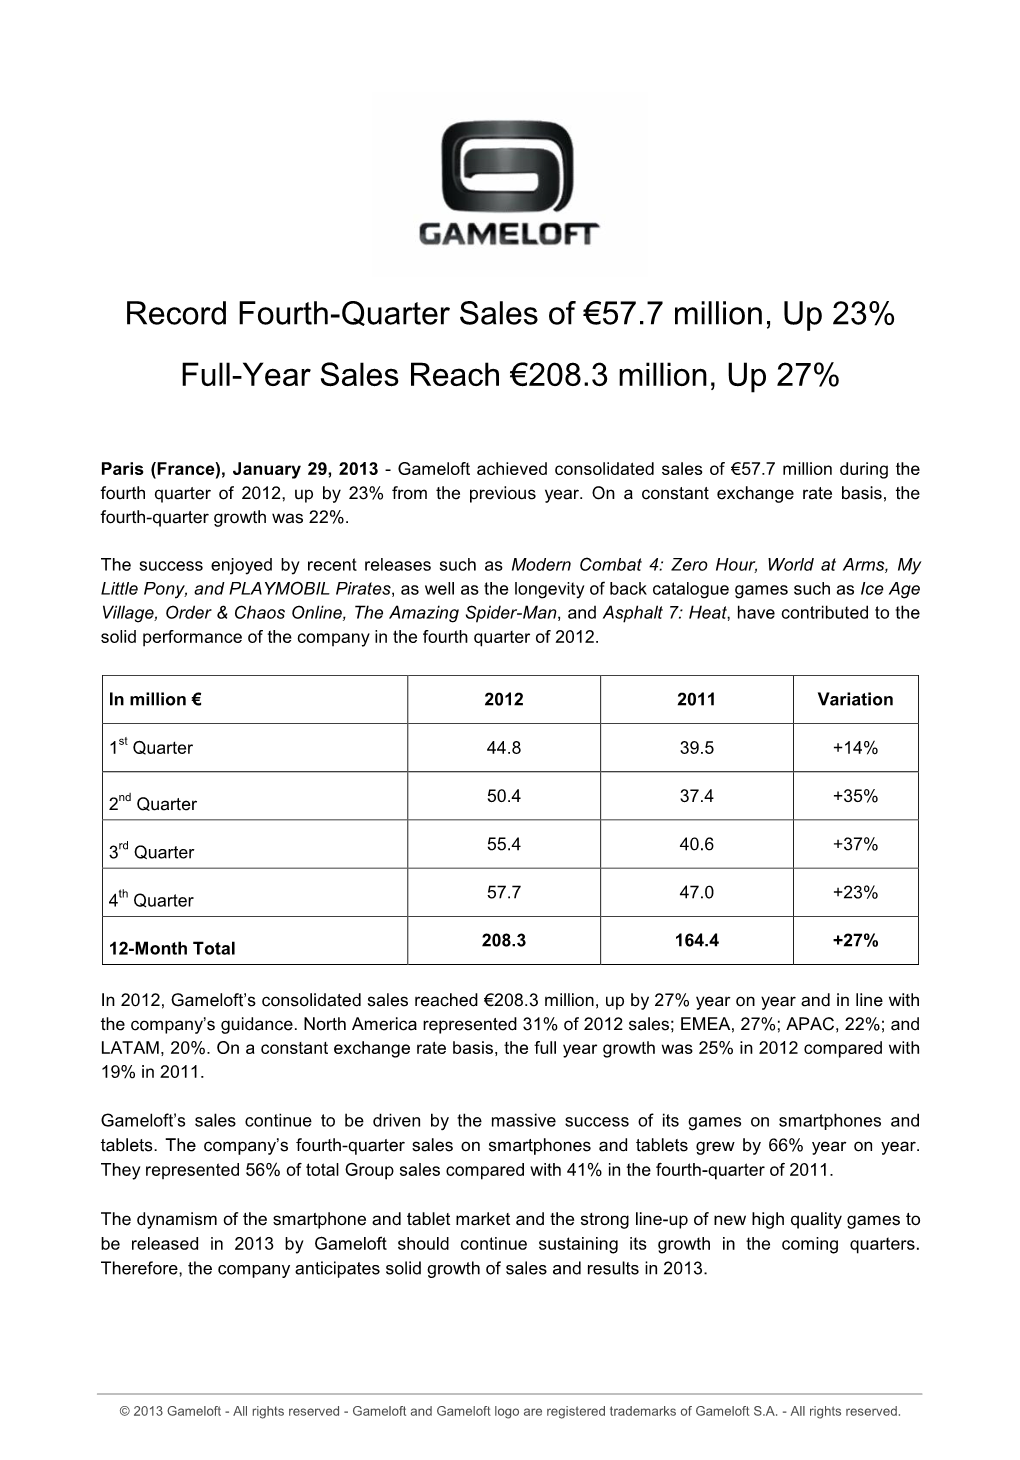 Record Fourth-Quarter Sales of €57.7 Million, up 23% Full-Year Sales Reach €208.3 Million, up 27%